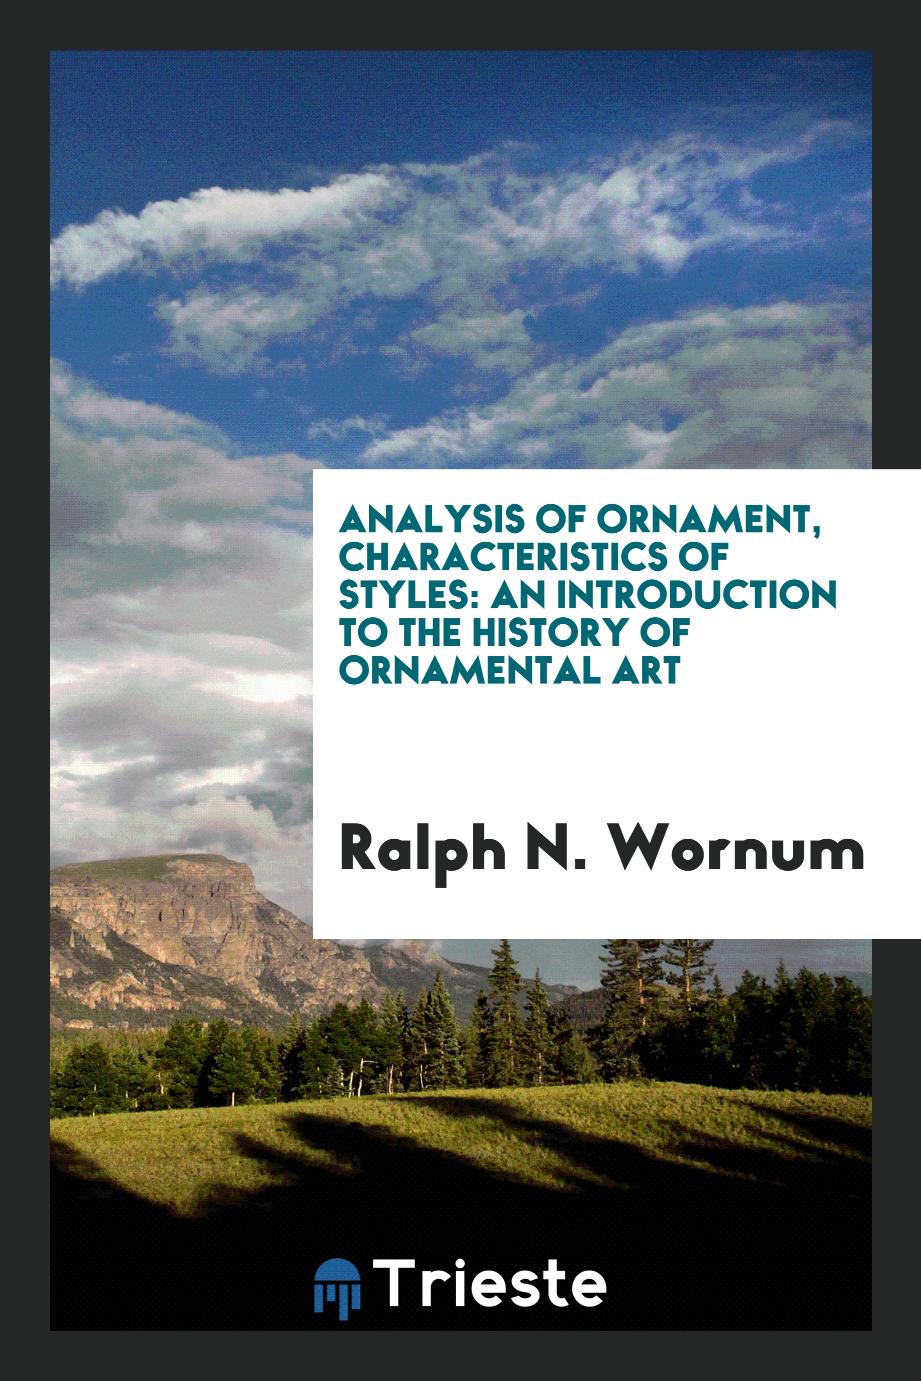 Analysis of Ornament, Characteristics of Styles: An Introduction to the History of Ornamental Art